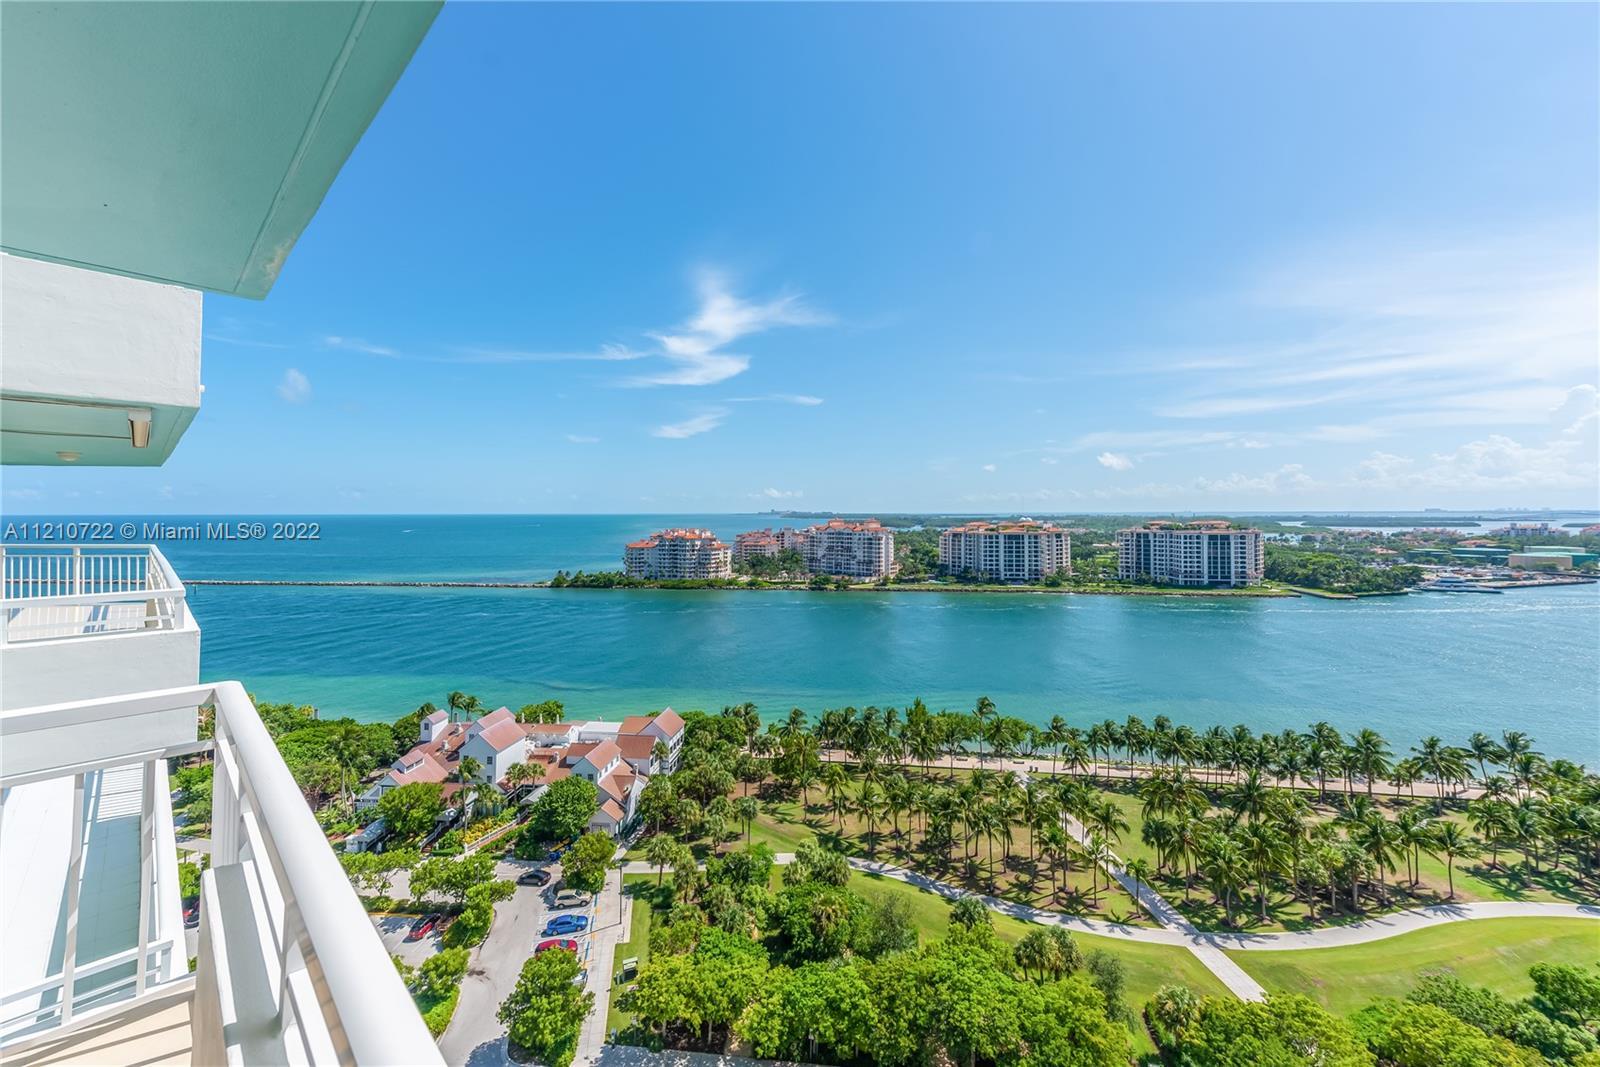 Unit 2001 at South Pointe Tower is a 2 bedroom 2 bathroom condo with spectacular views of the Ocean,